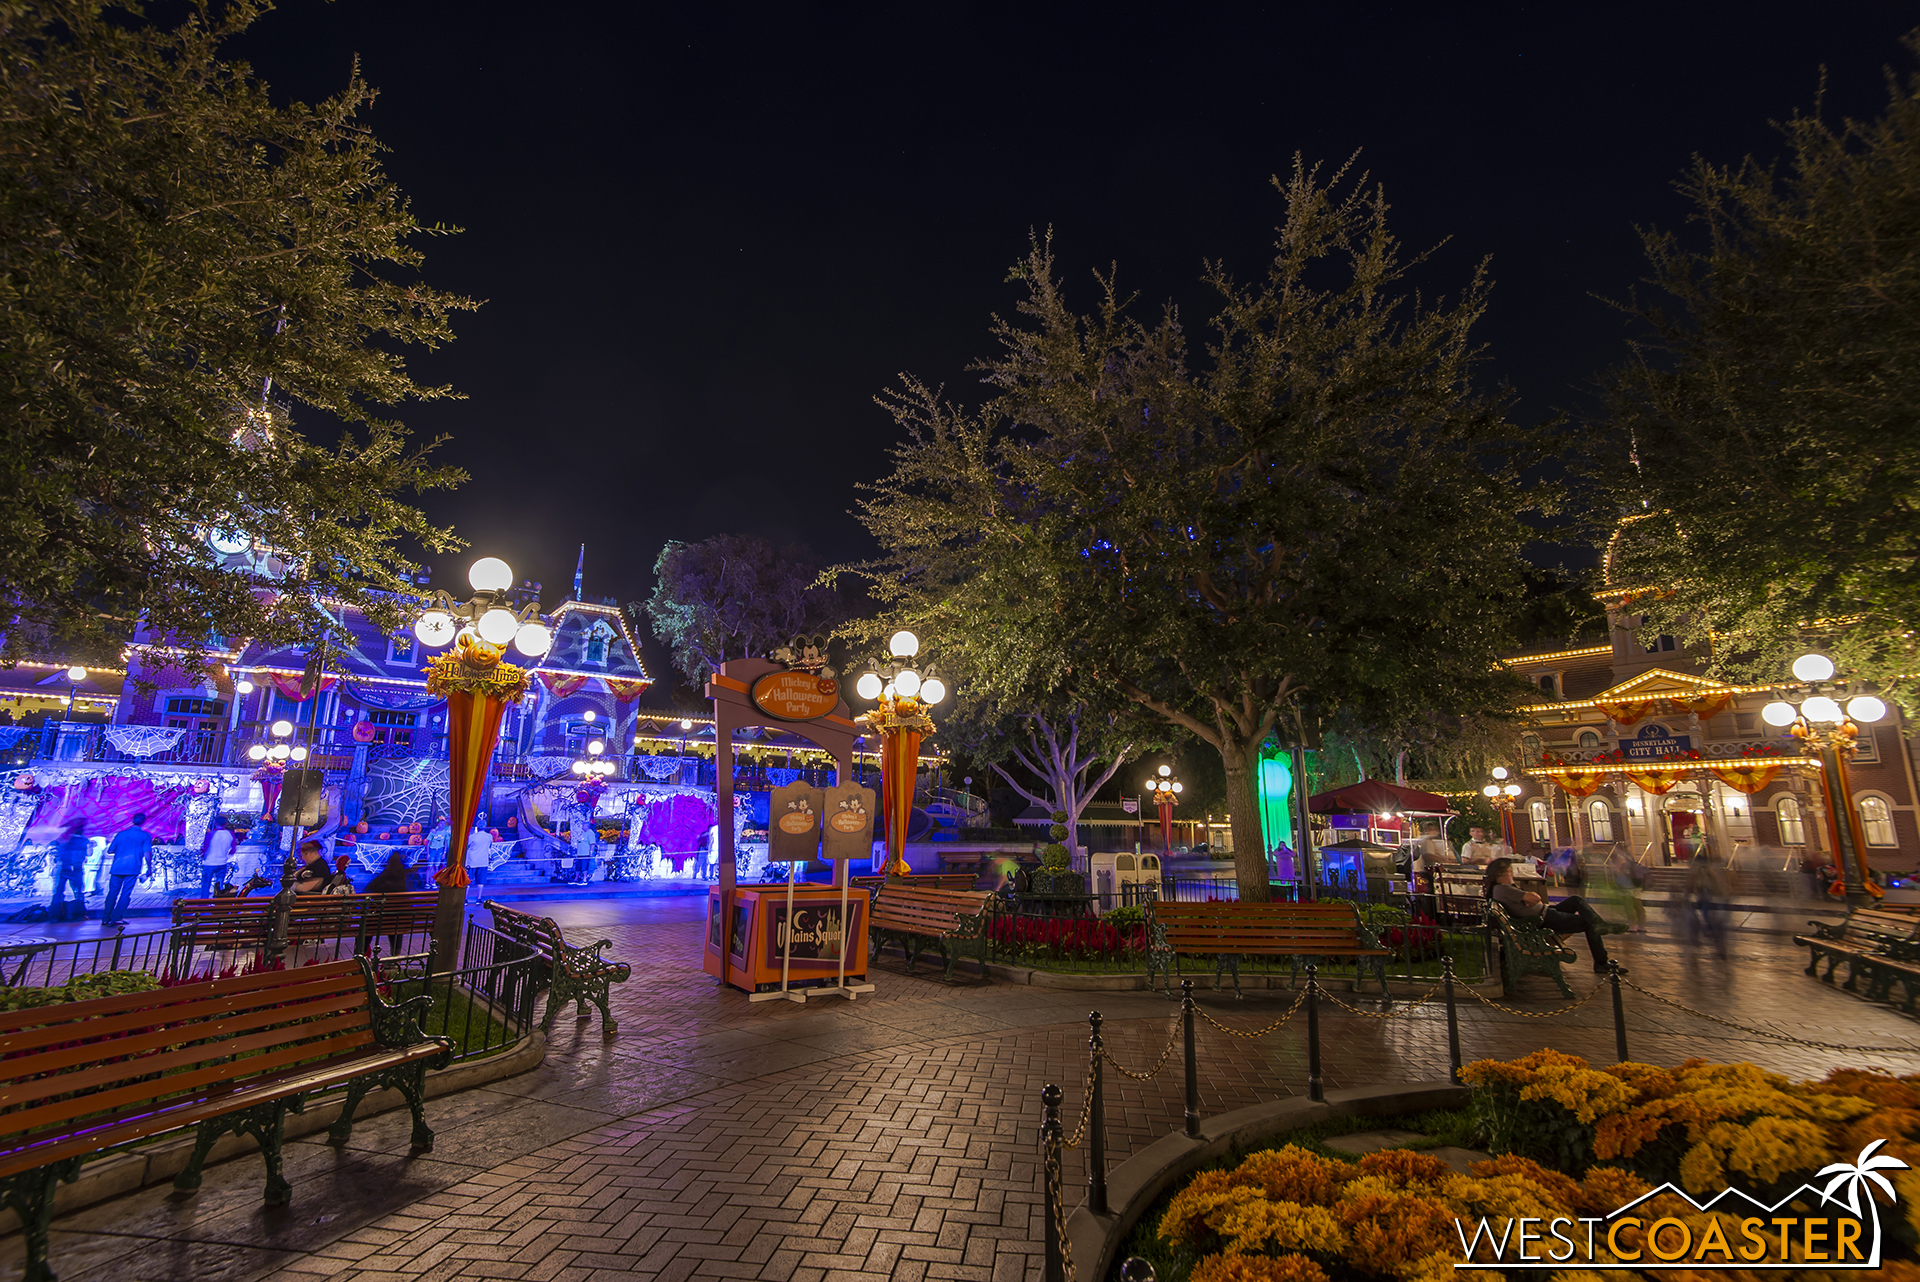  The Disneyland Railroad station also receives decorations and a dramatic lighting package. 